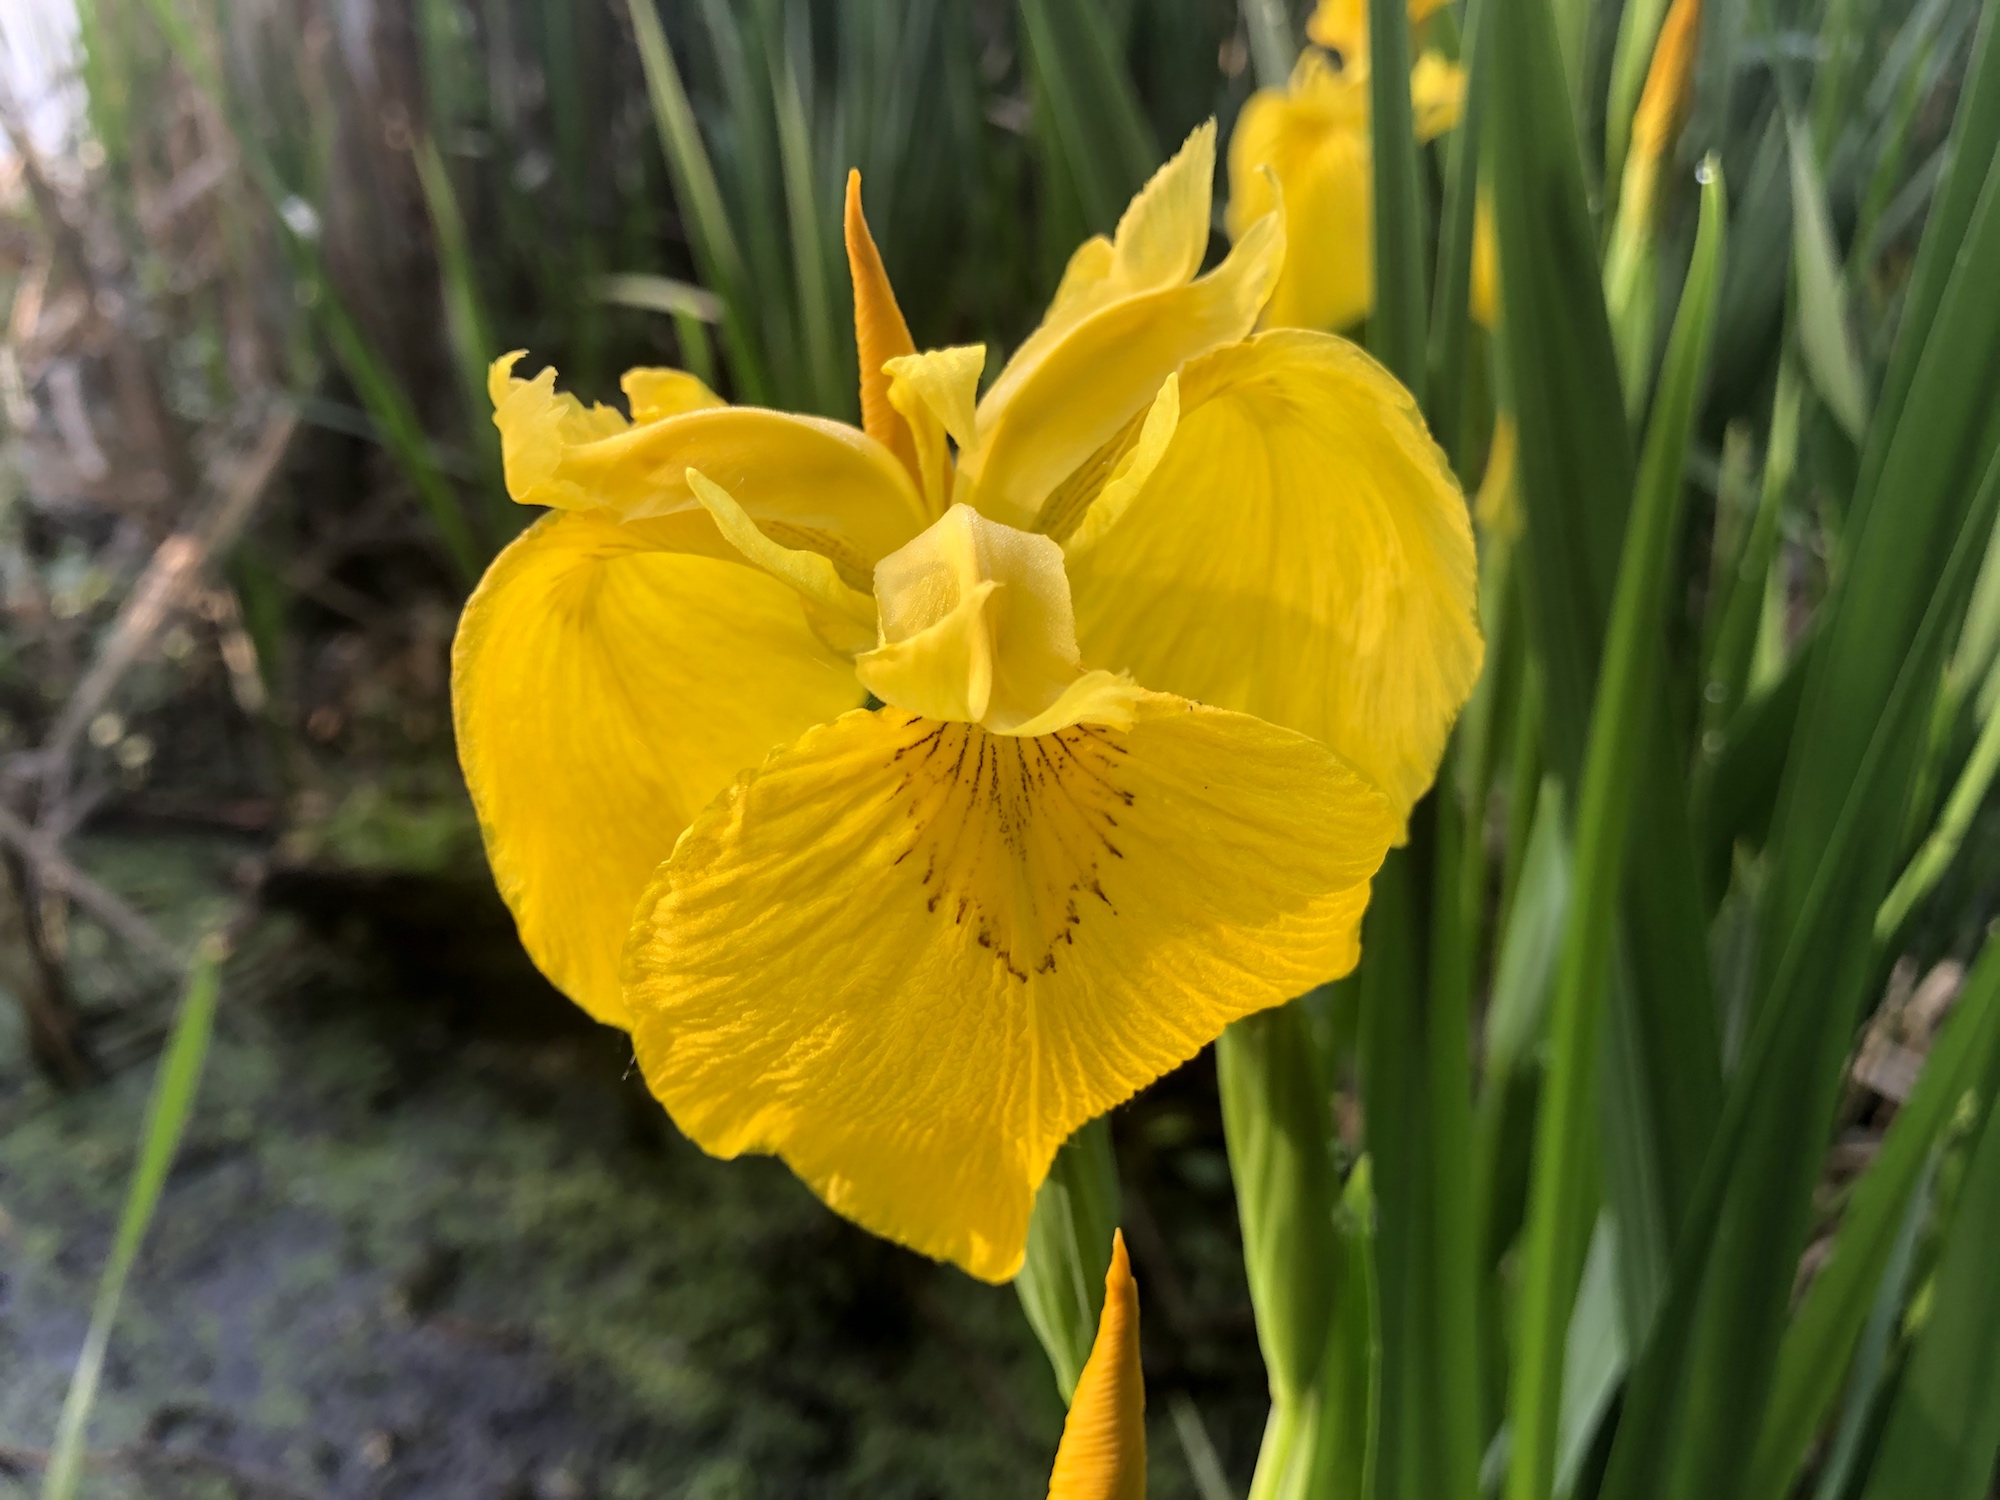 Yellow Flag Iris by Cattails on Lake Wingra on June 4, 2020.